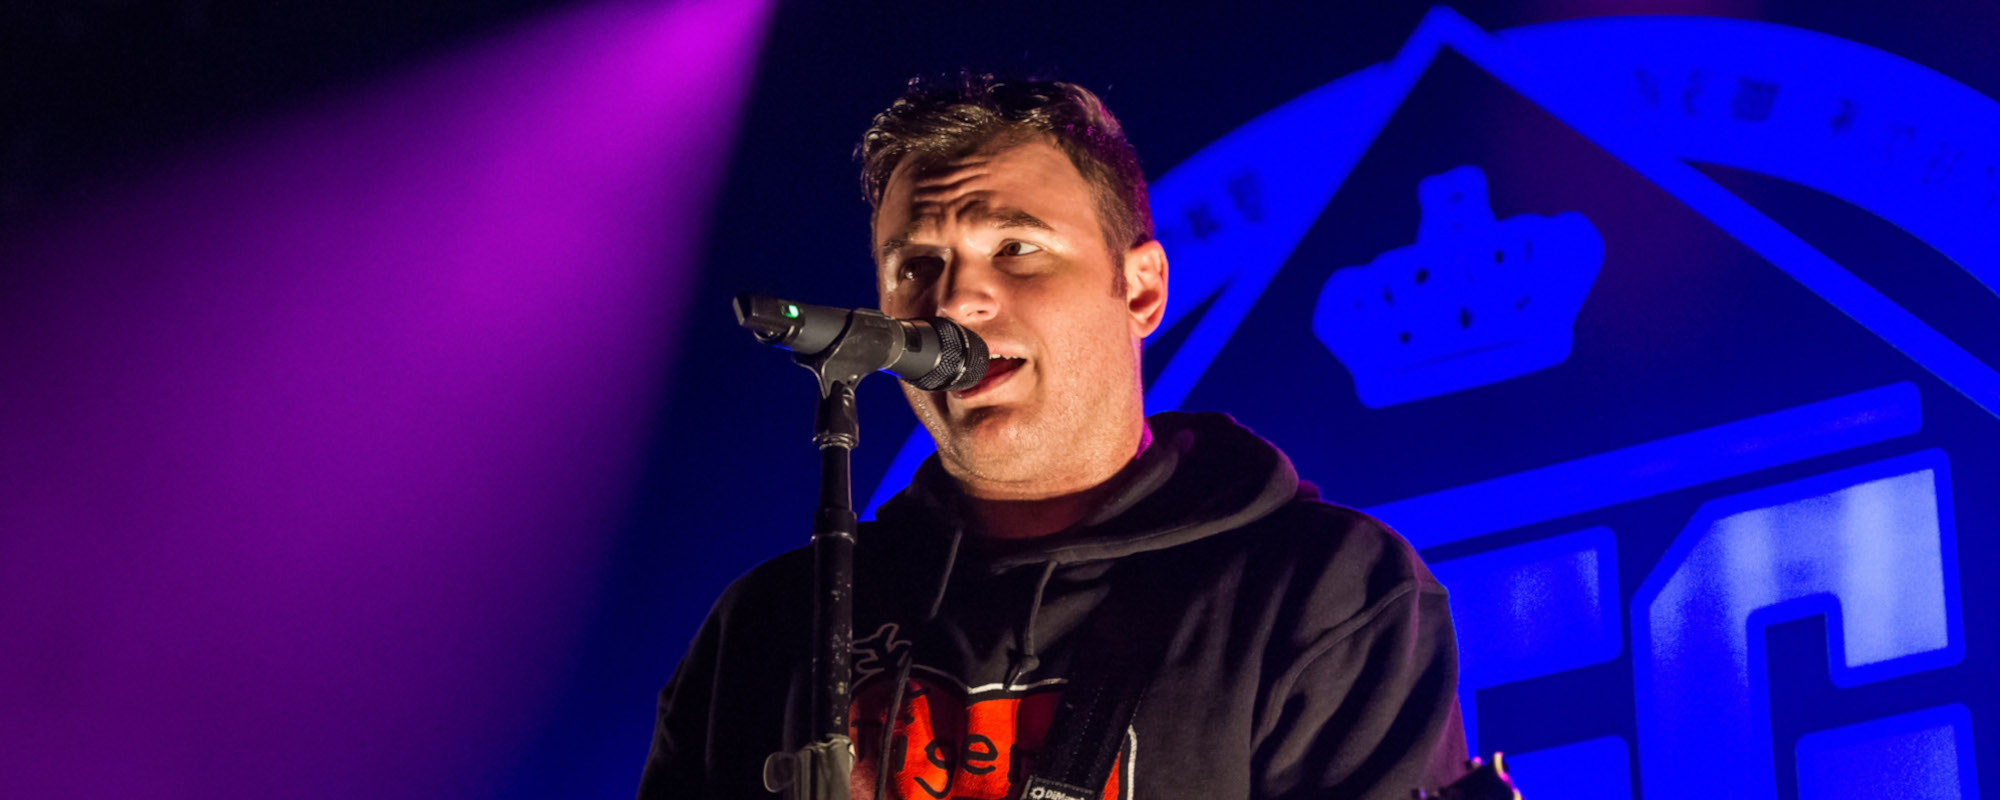 New Found Glory’s Chad Gilbert Recovers After Emergency Cancer Surgery: “If My Wife Hadn’t Found Me, I Would’ve Fallen Into a Coma or Died”